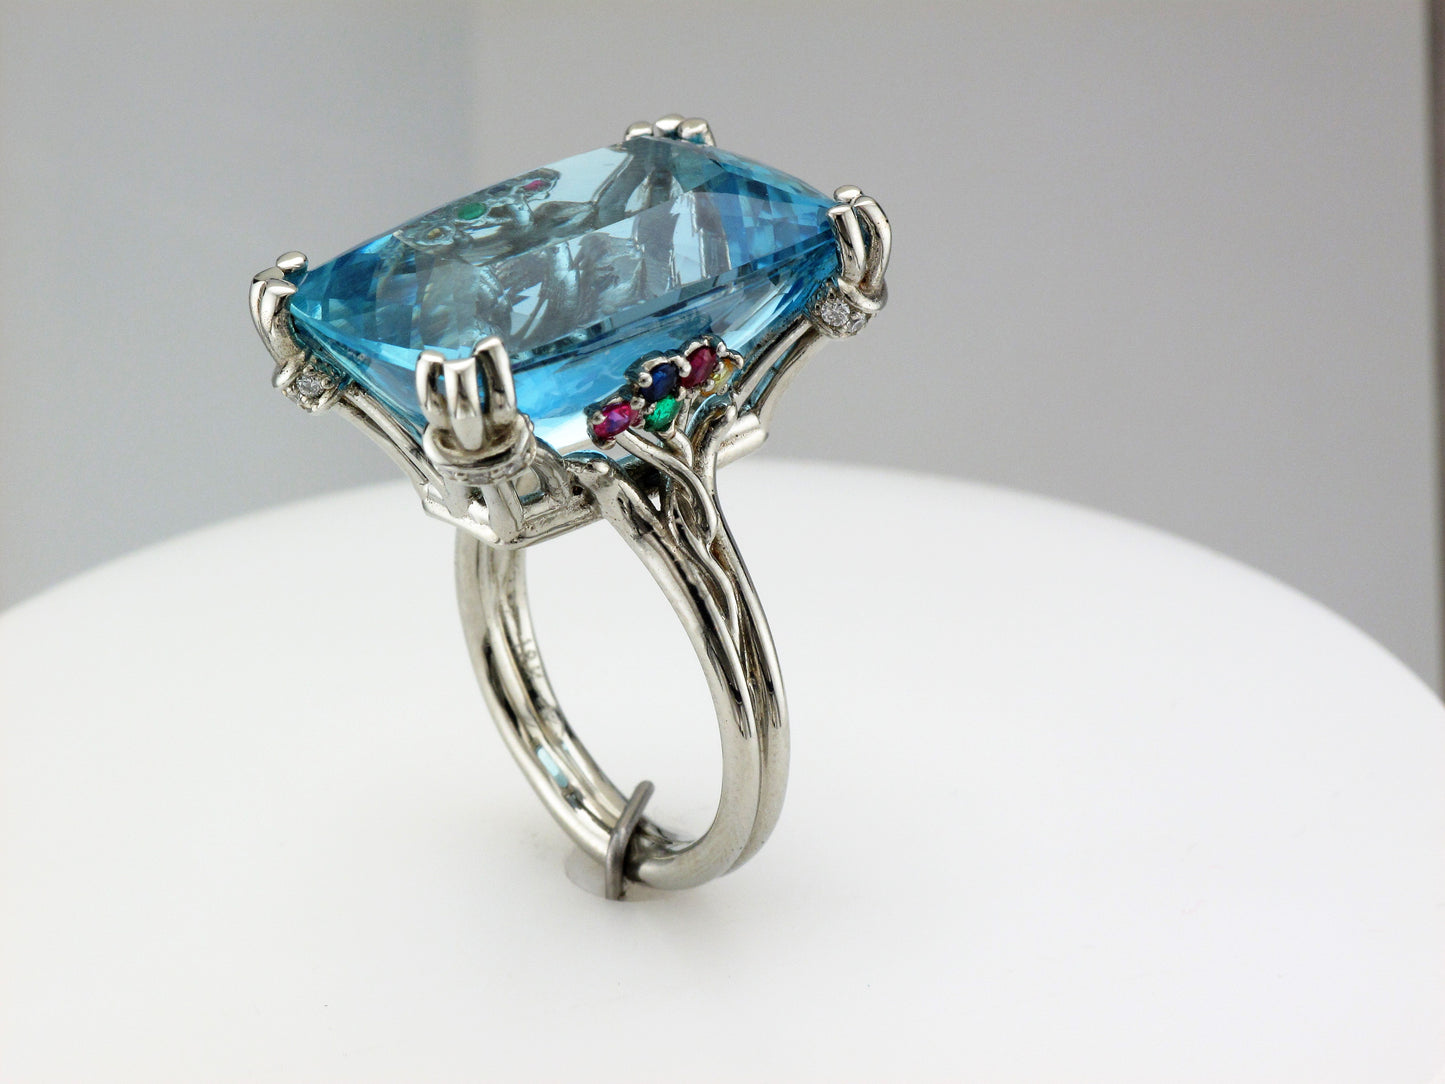 18KW Aquamarine Ring with Diamond, Sapphire, Ruby and Emerald Accents